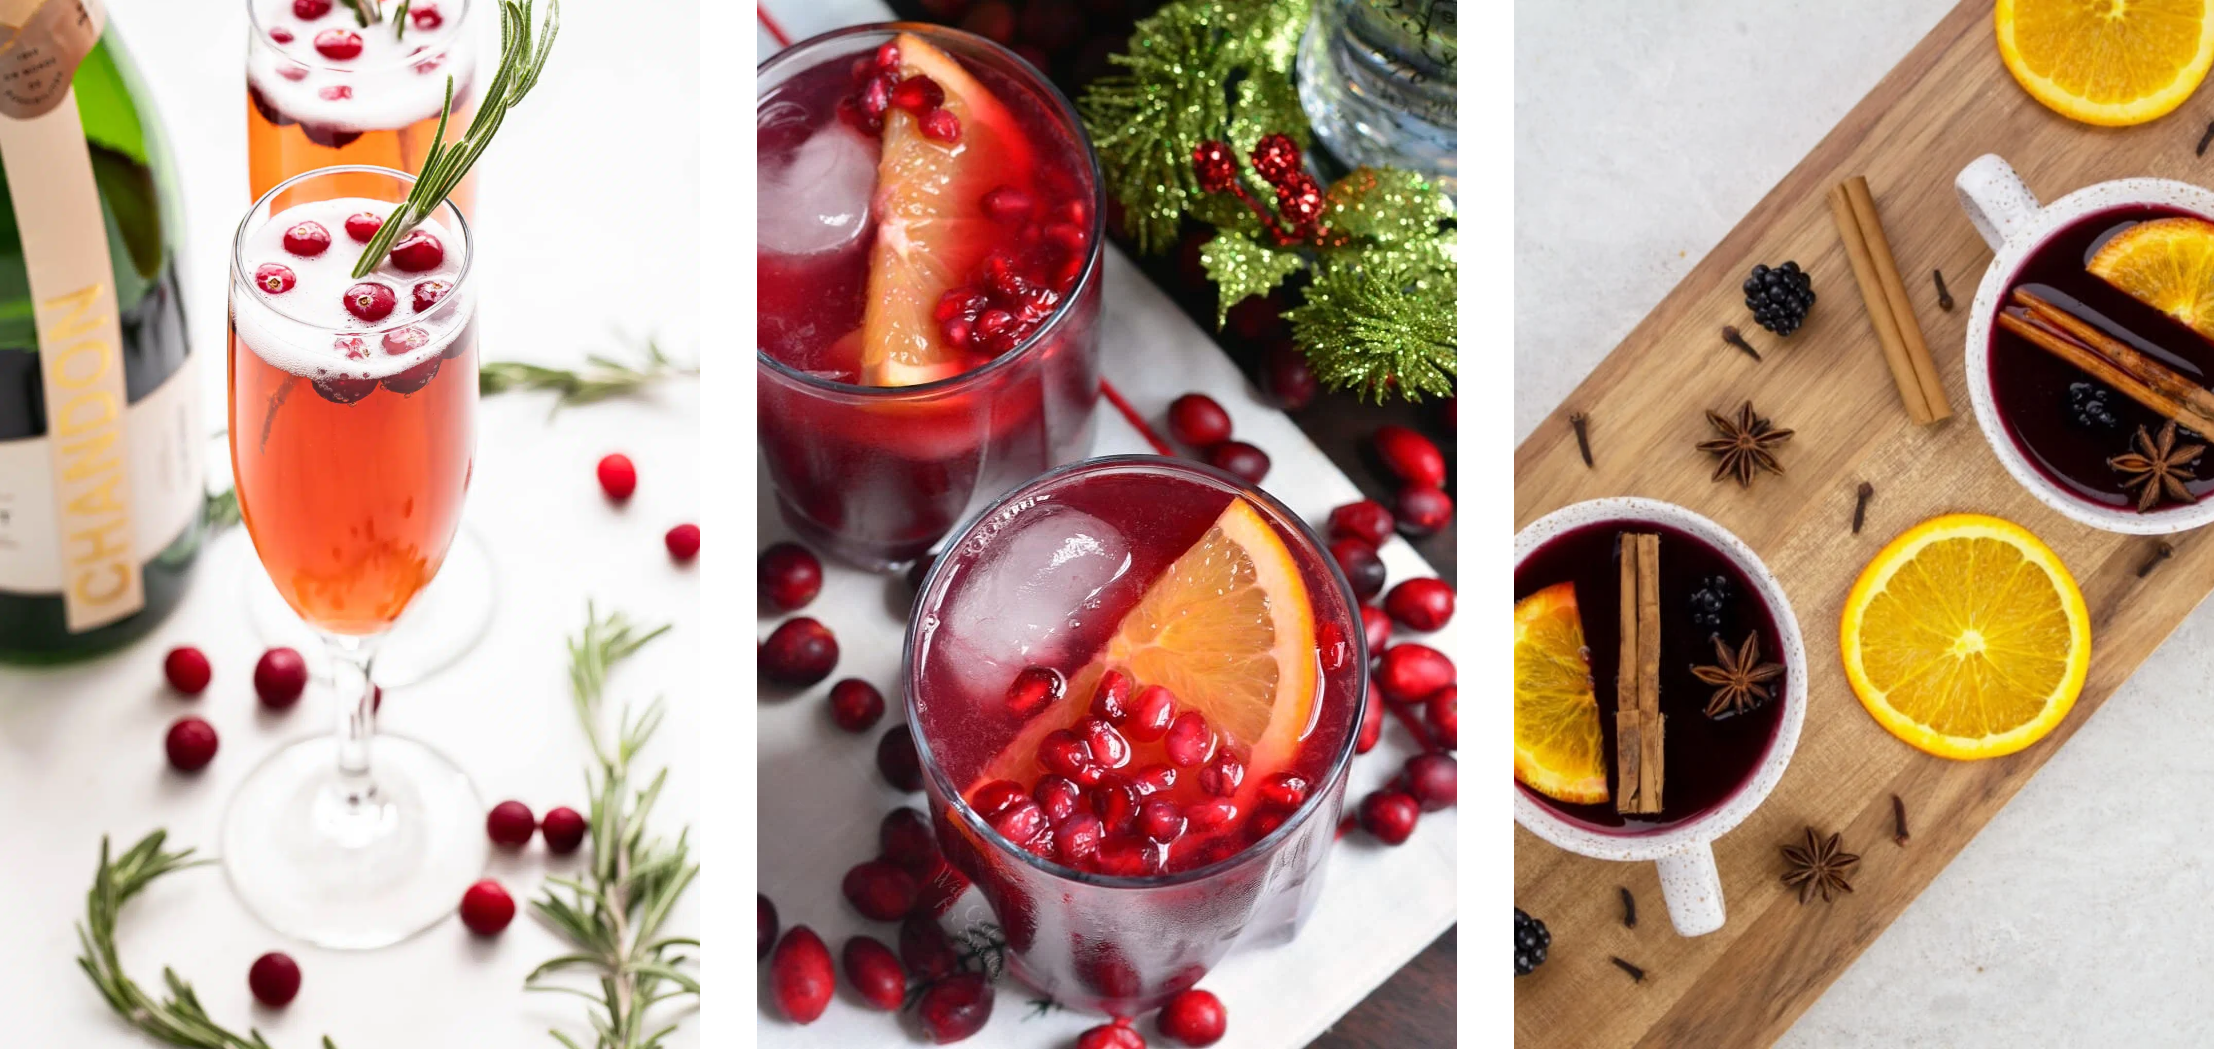 Images courtesy of: mindful mocktail, will cook for smiles, reciperunner